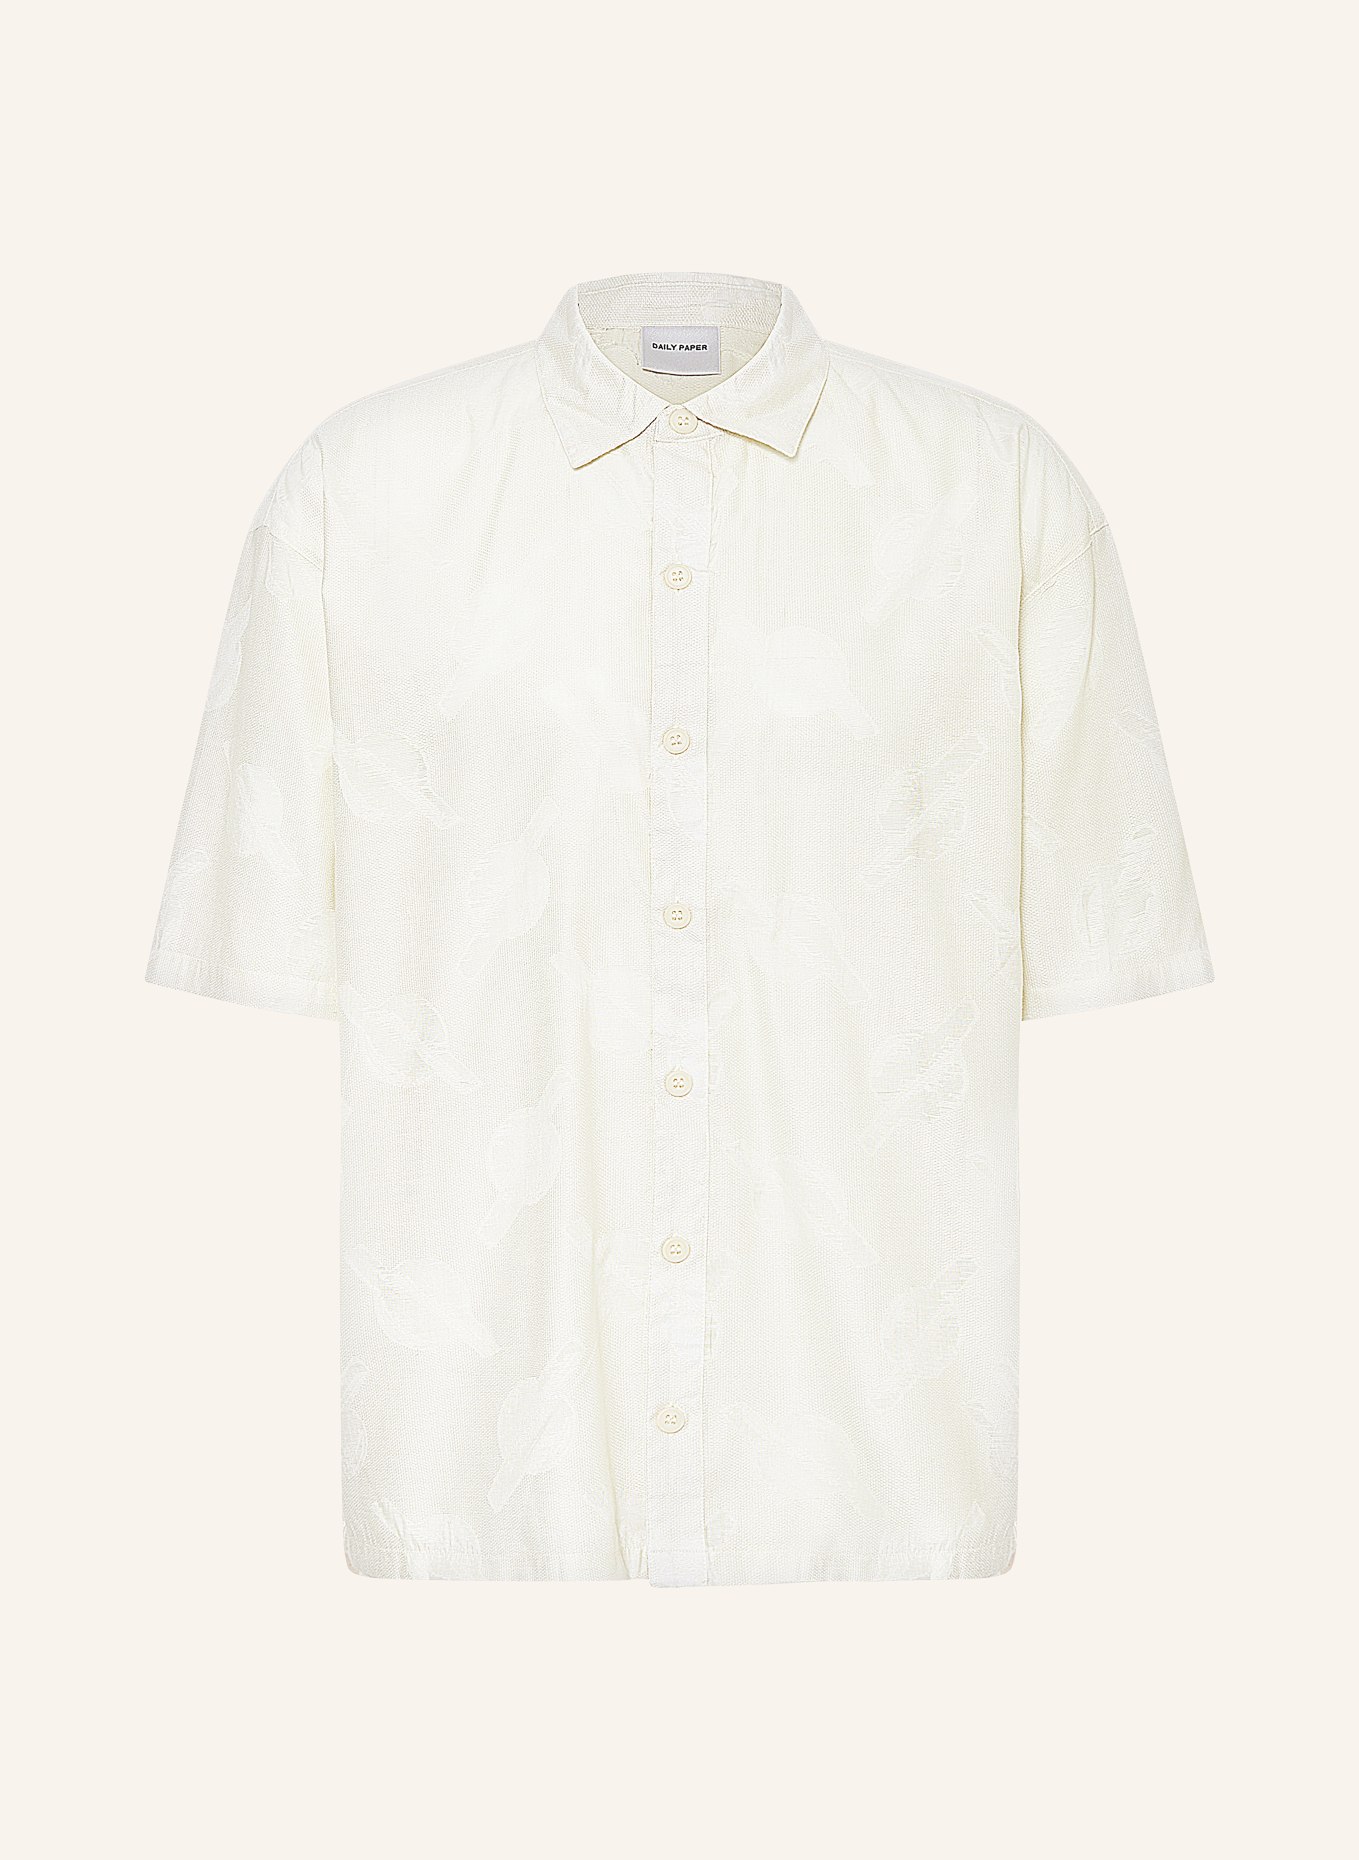 DAILY PAPER Short sleeve shirt SALIM relaxed fit, Color: ECRU (Image 1)